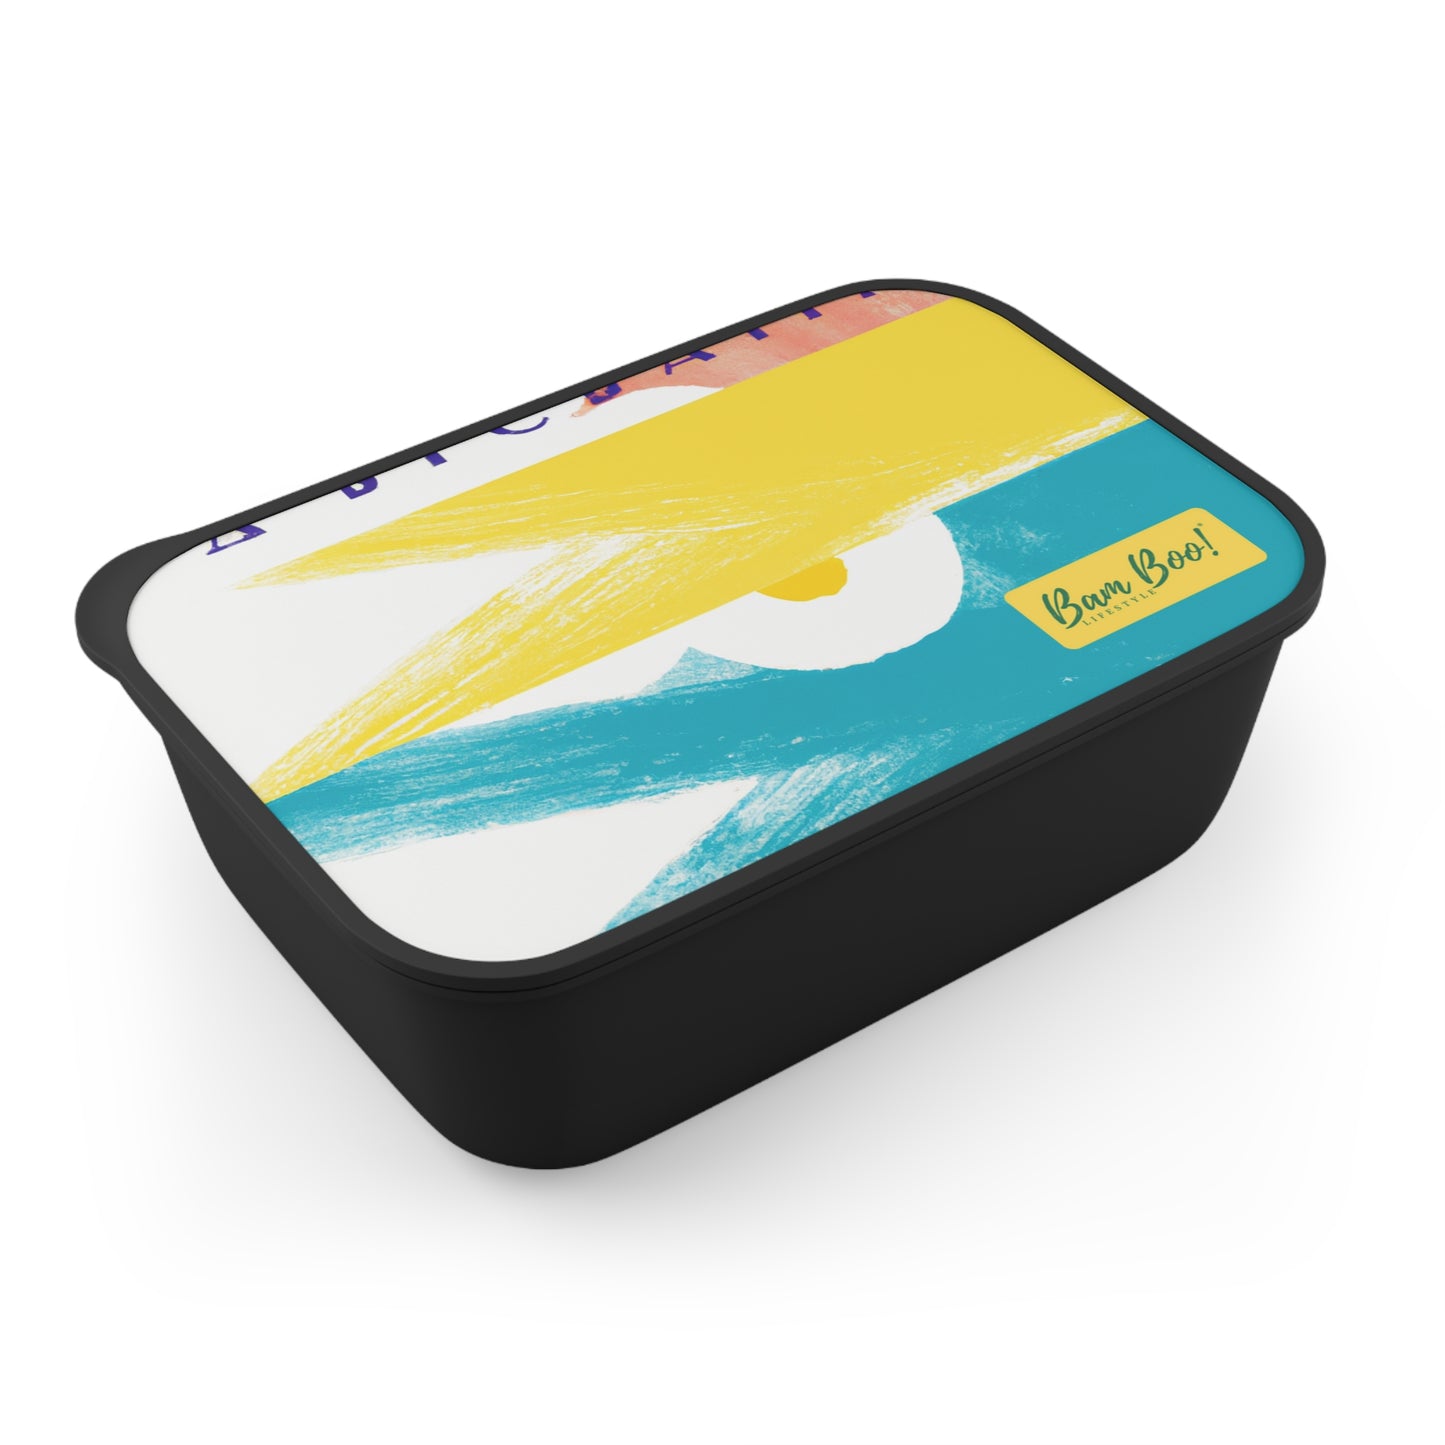 "3 Primary Colors, 1 Memory: A Colorful Reflection" - Bam Boo! Lifestyle Eco-friendly PLA Bento Box with Band and Utensils